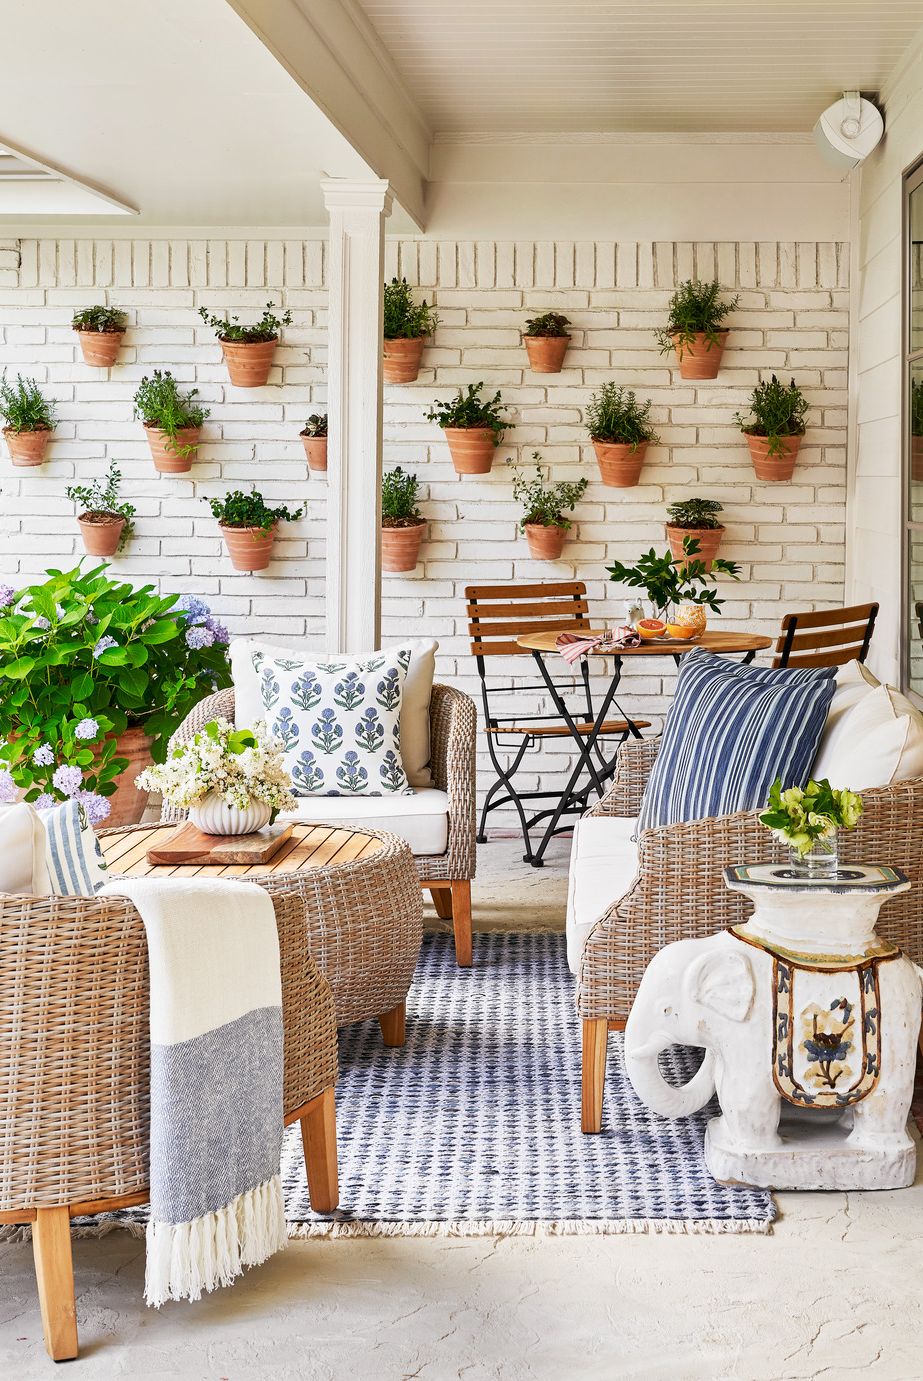 wall potted plants mounted on white brick wall woven patio furniture, wicker, rattan